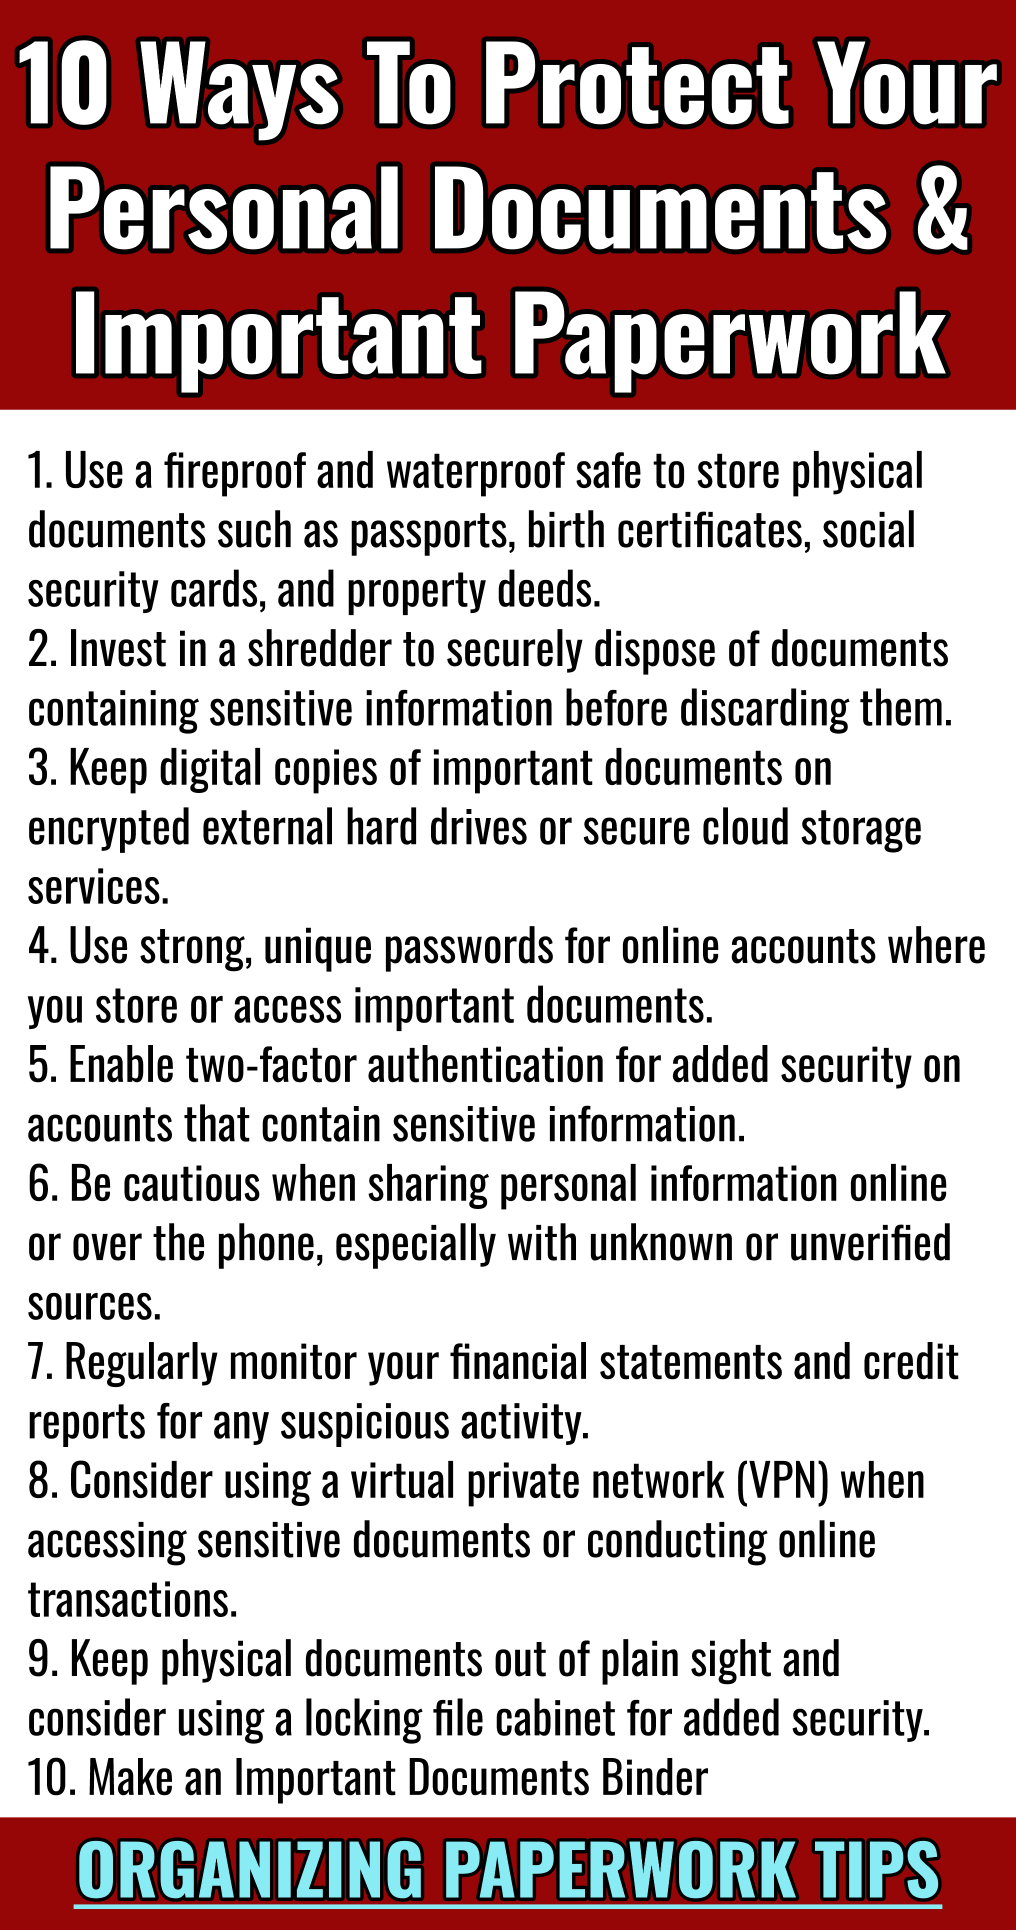 10 ways to protect personal documents and important paperwork